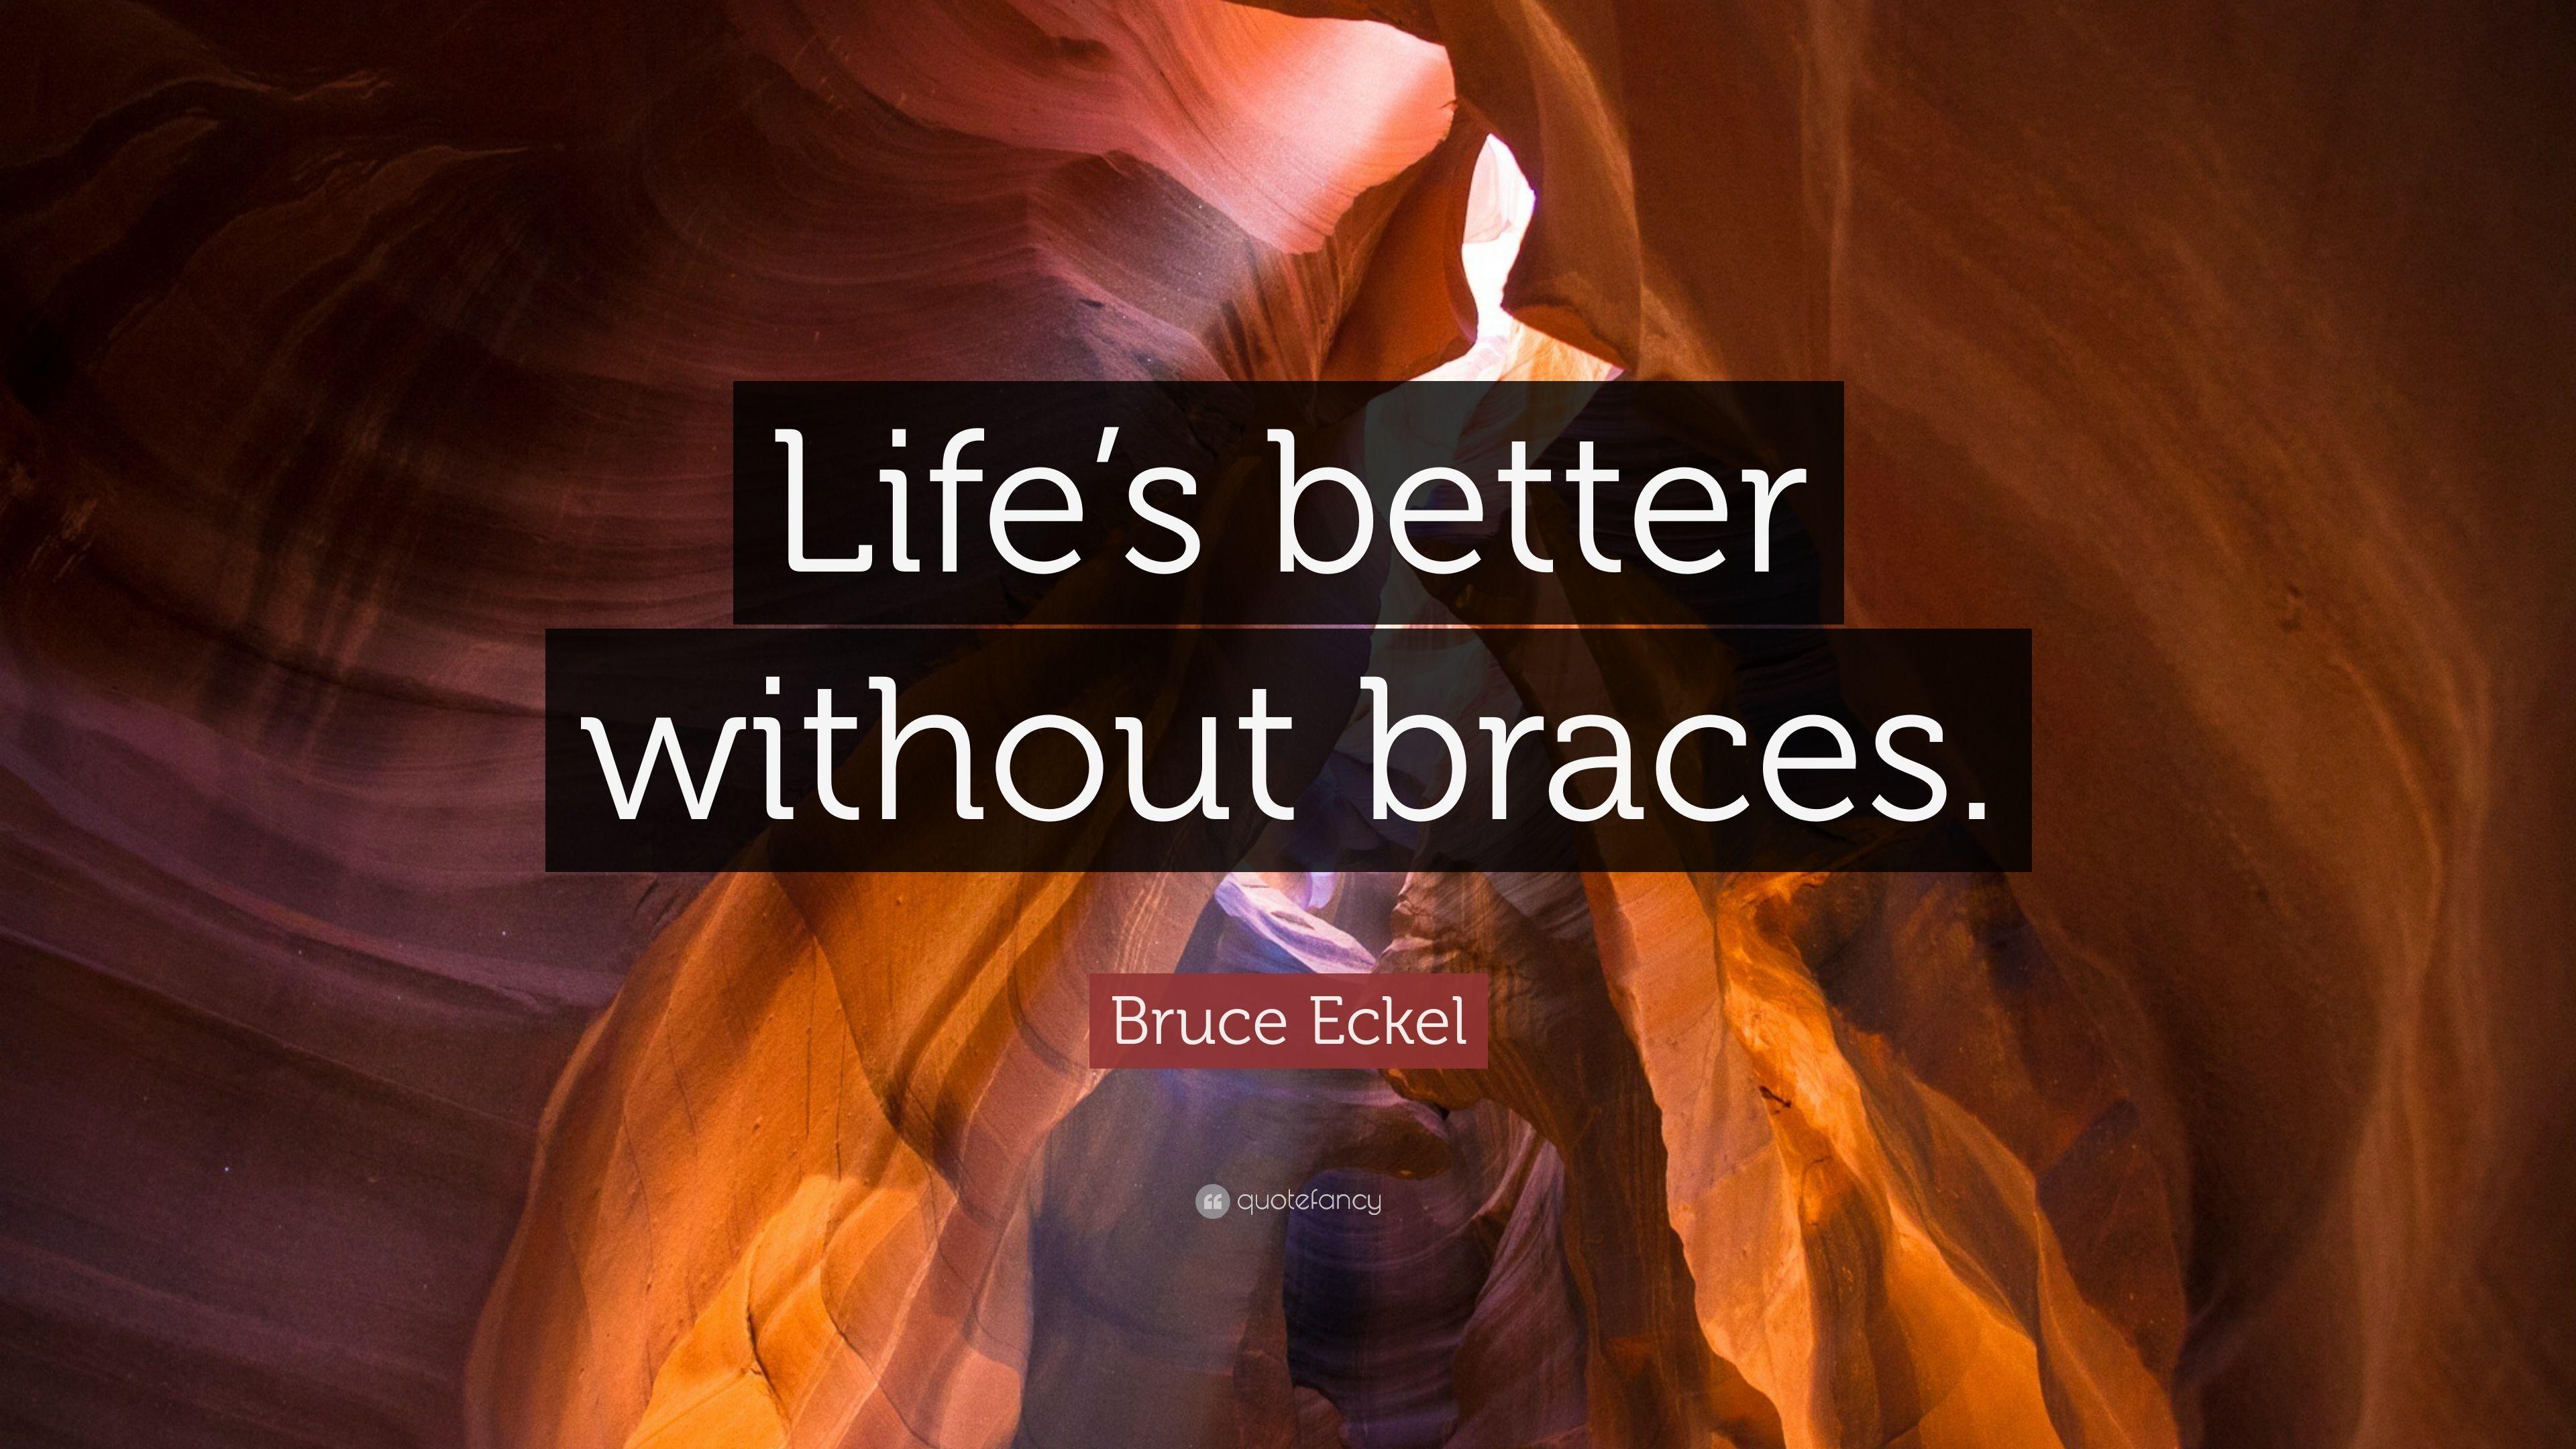 Bruce Eckel Quote: “Life's better without braces.” 7 wallpaper